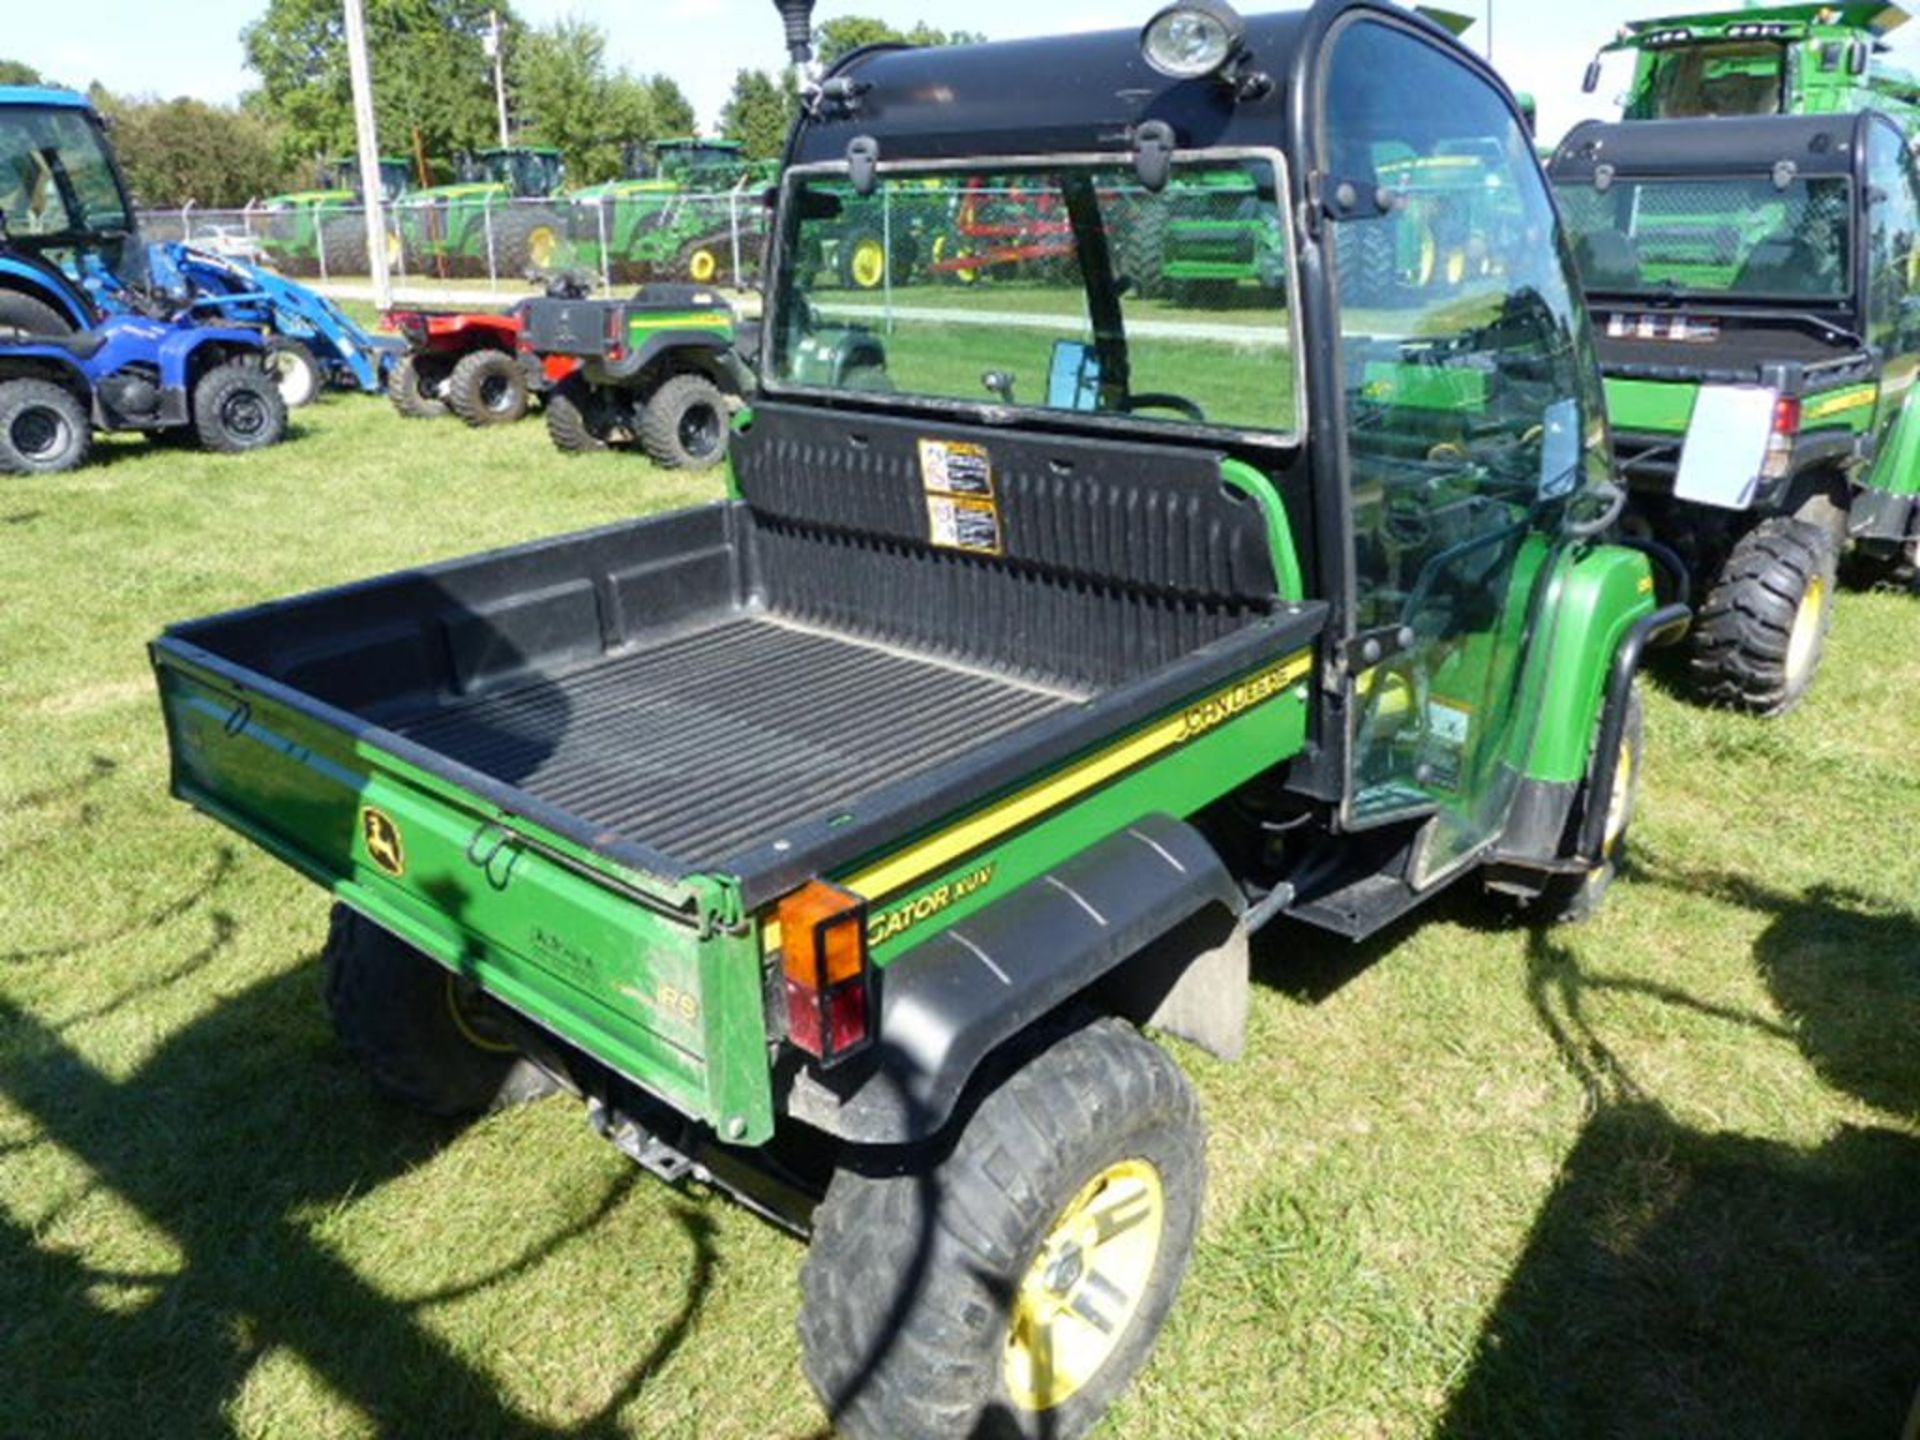 2009 JD 850D GATOR, 4WD, DIESEL, FULLY ENCLOSED FACTORY CAB, POWER BED LIFT, BED LINER - Image 3 of 6